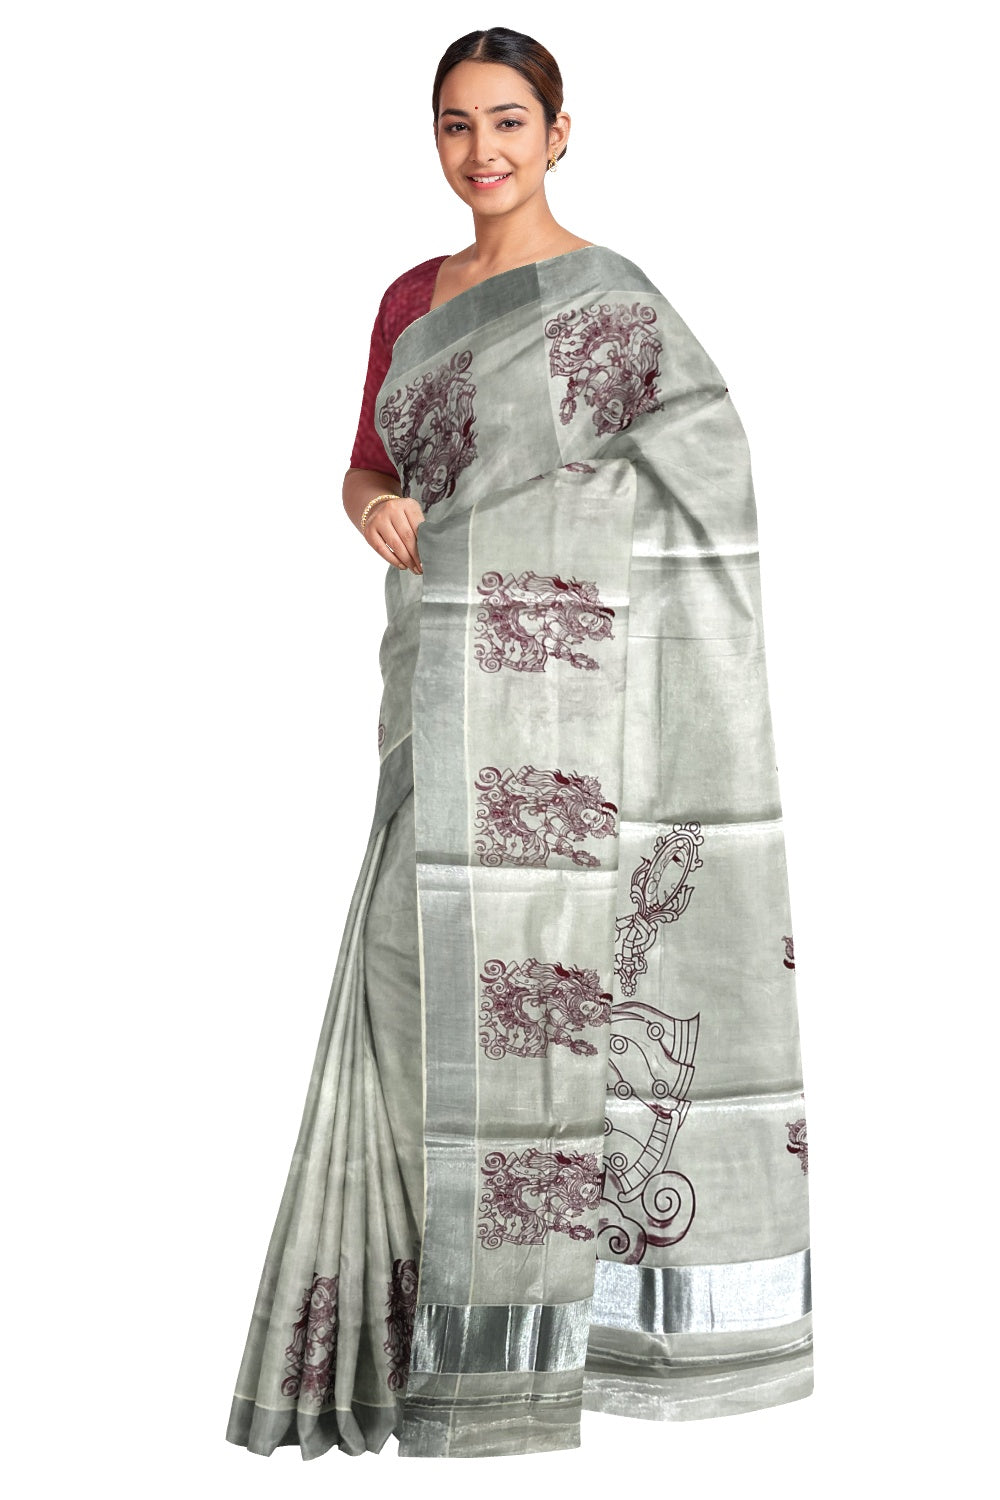 Silver Tissue Saree with Red Krishna Mural Design (With Tassels)